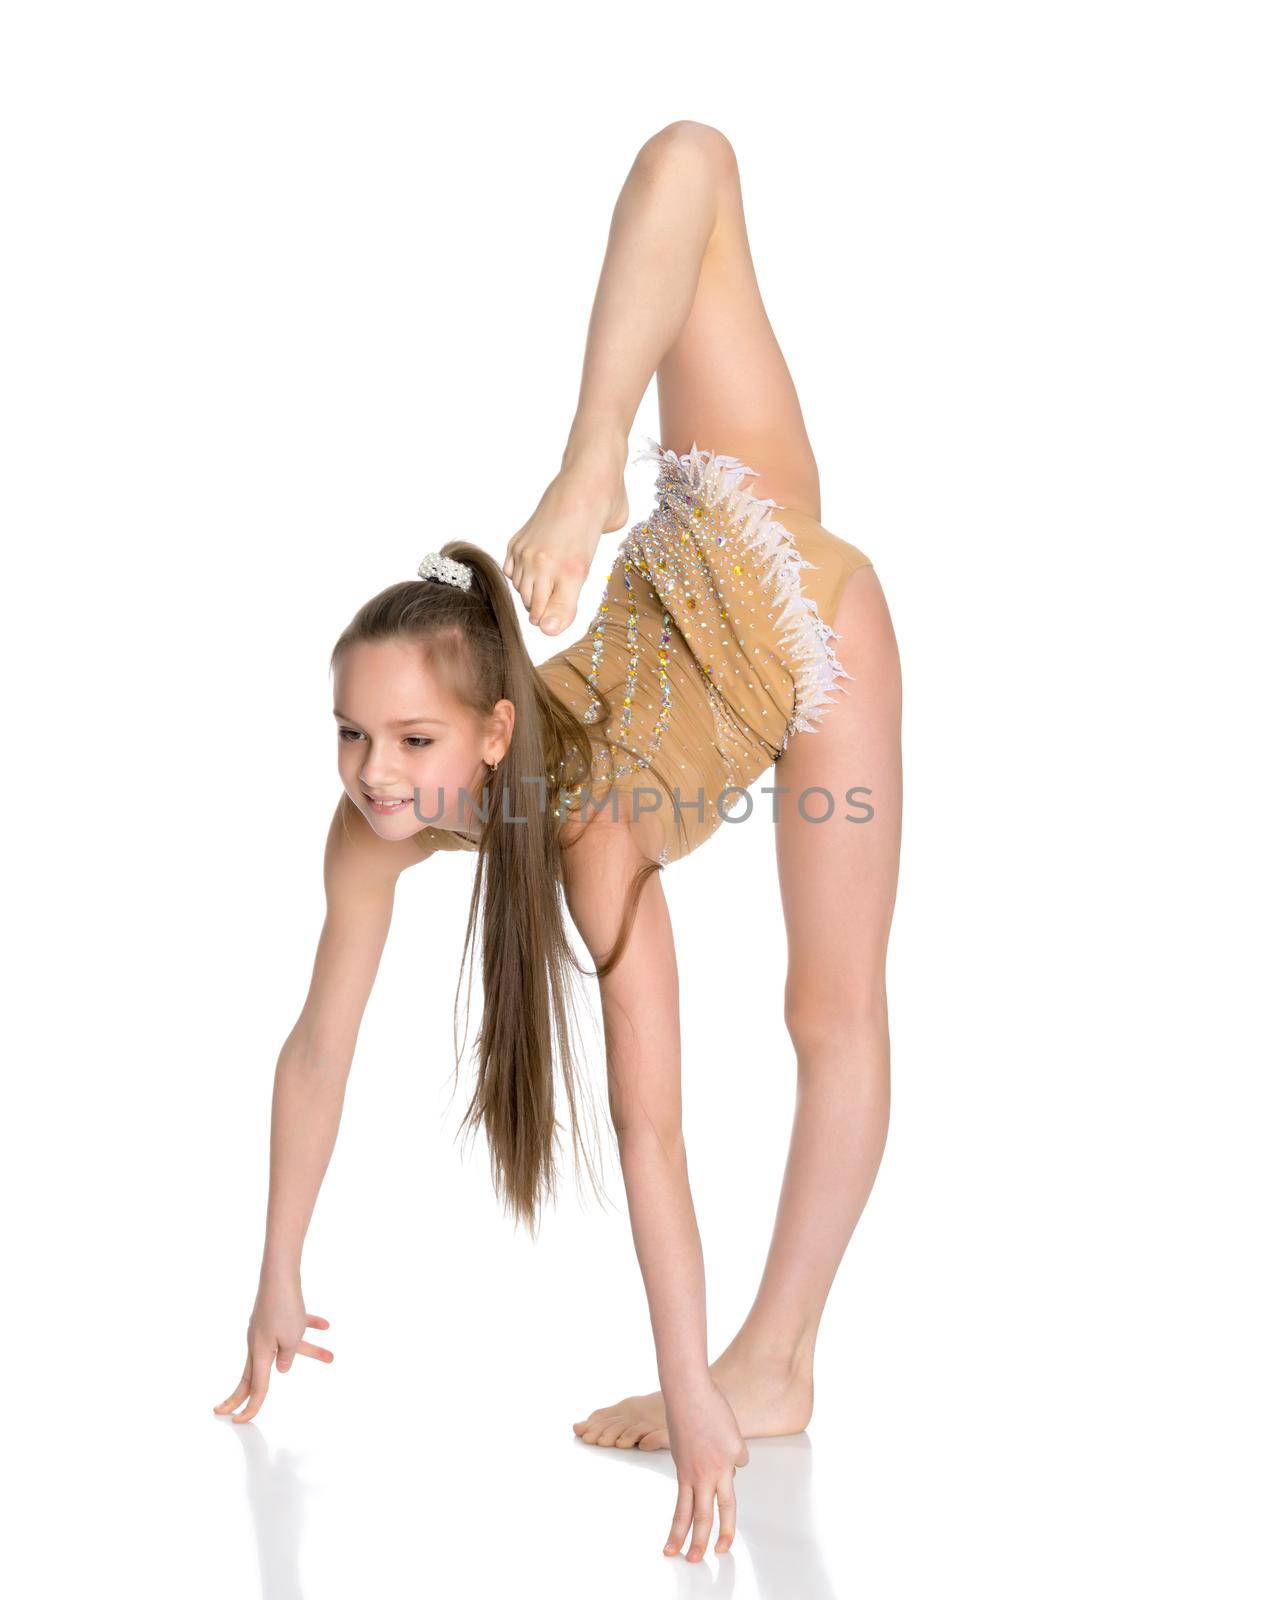 little girl gymnast performs an exercise. Balance on one leg with a grip. Sport concept, gymnastics, fitness. Isolated on white background.